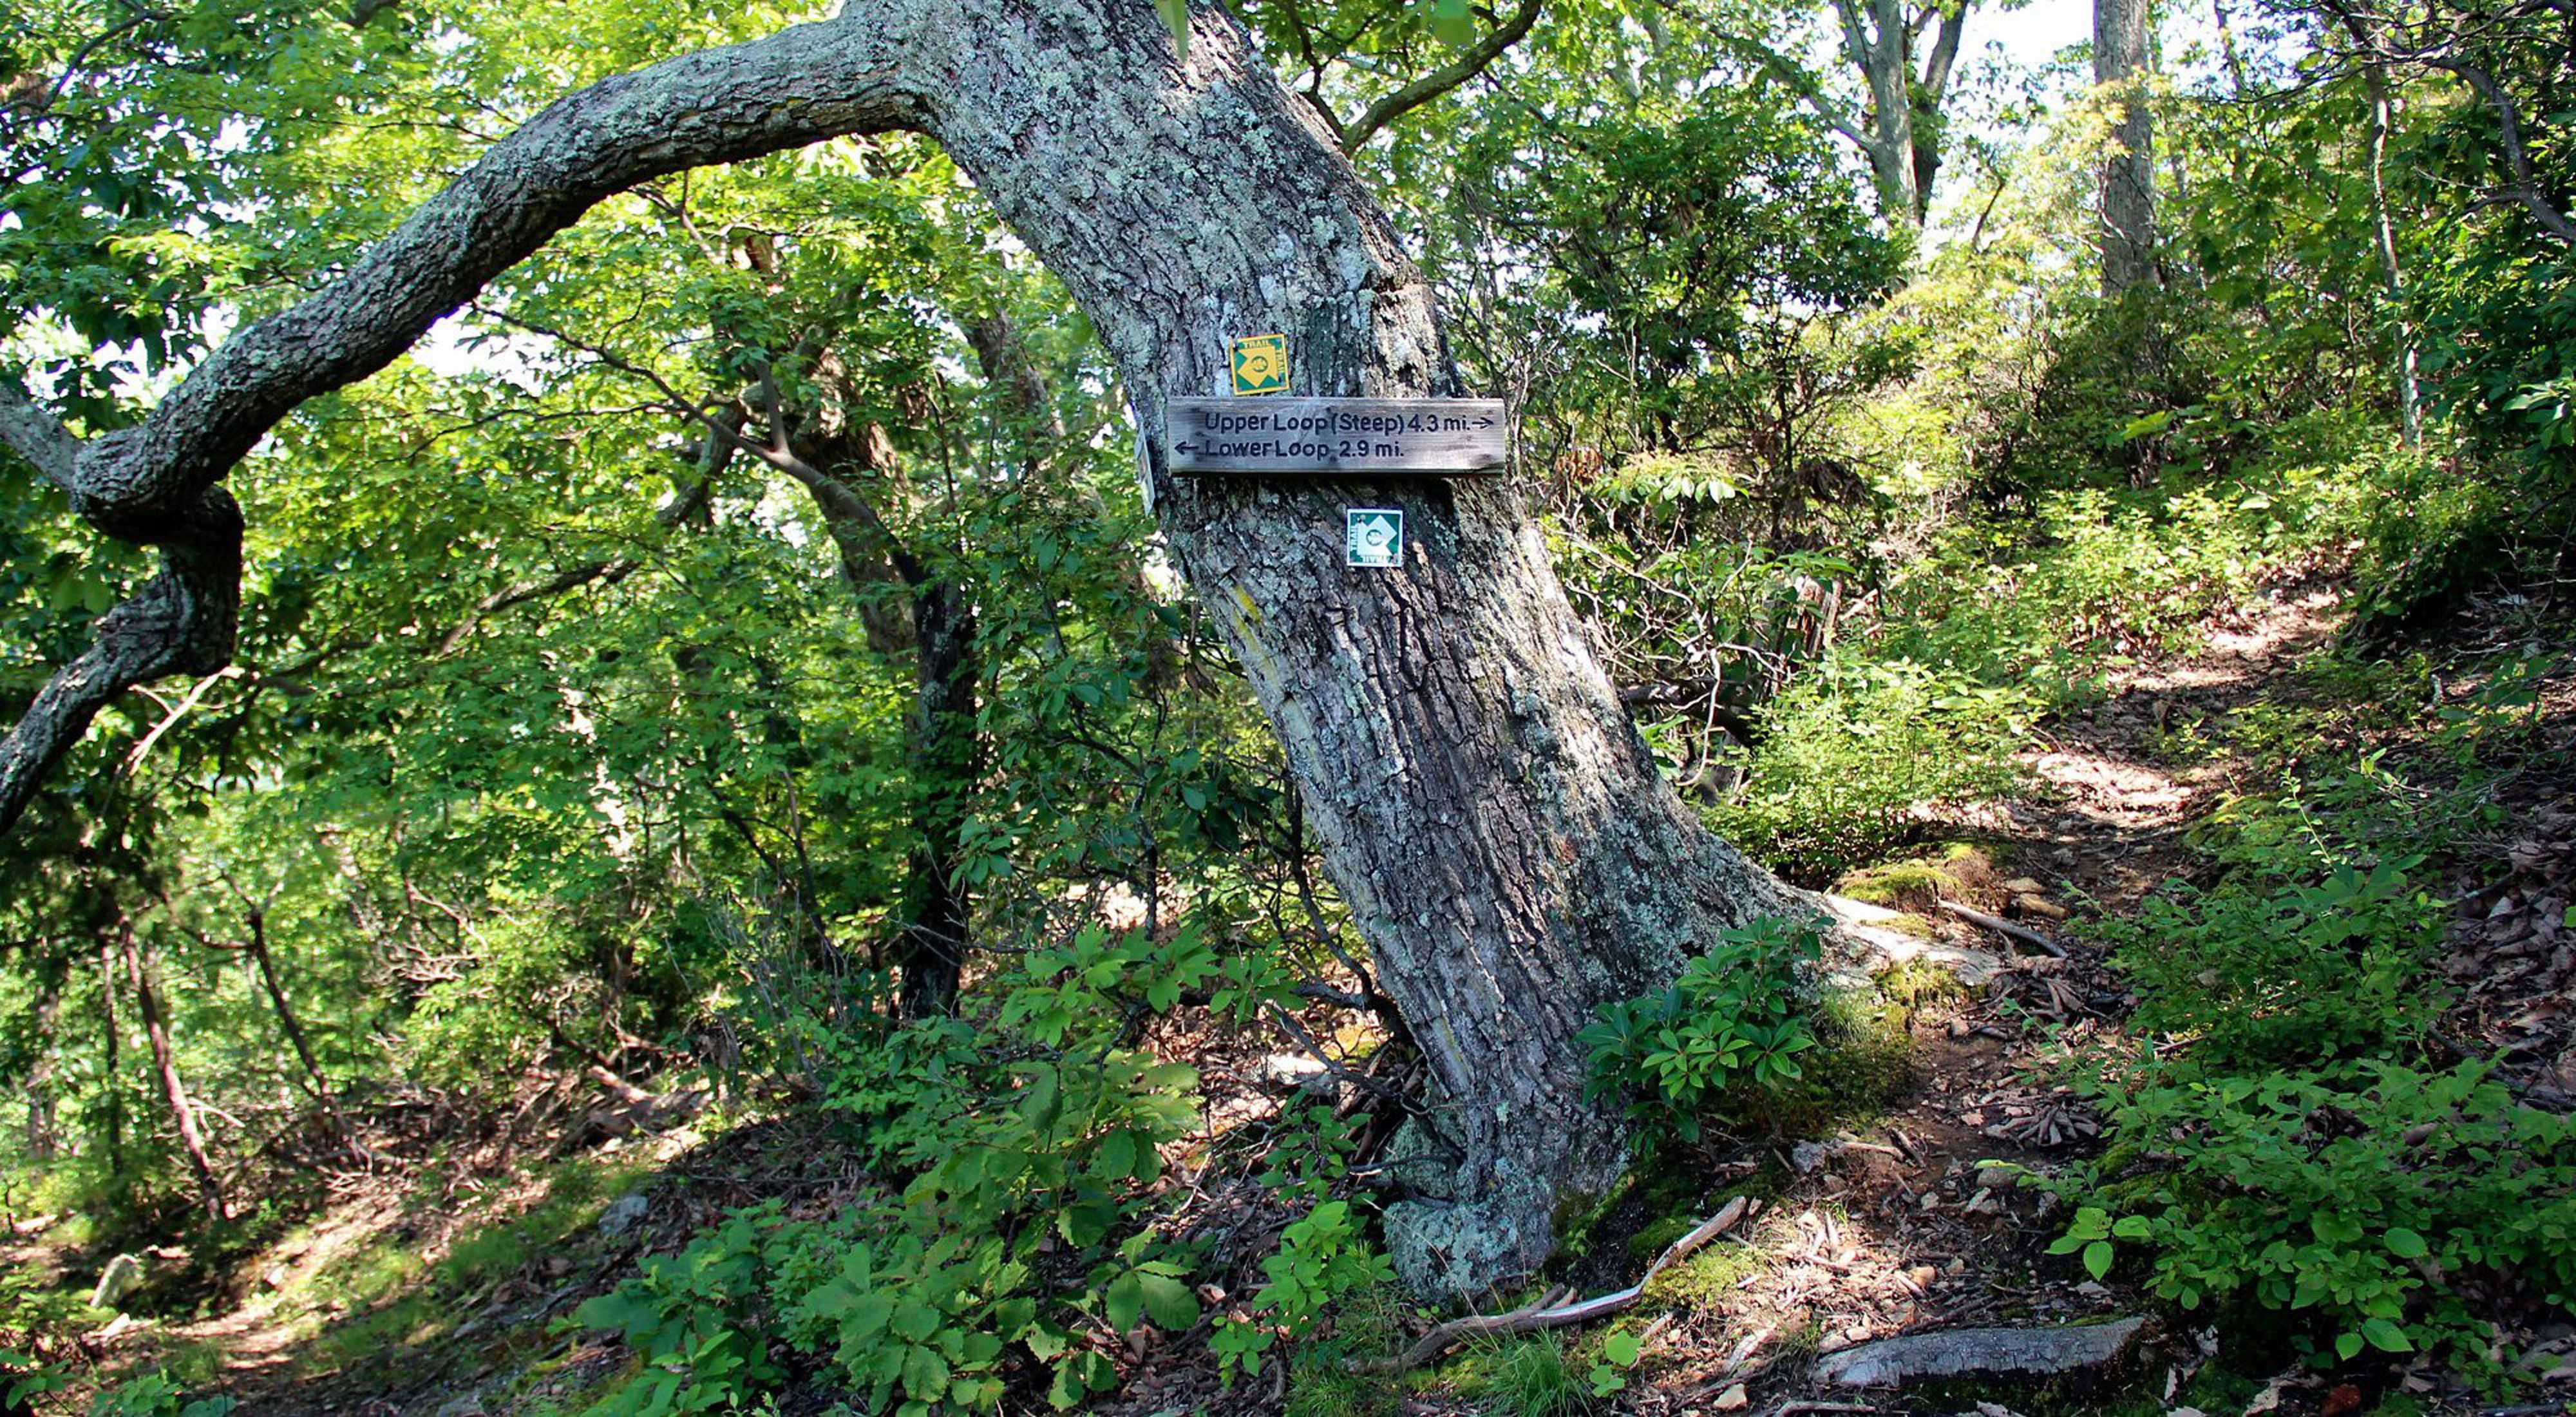 A forest with a large leaning tree with trail signs attached.